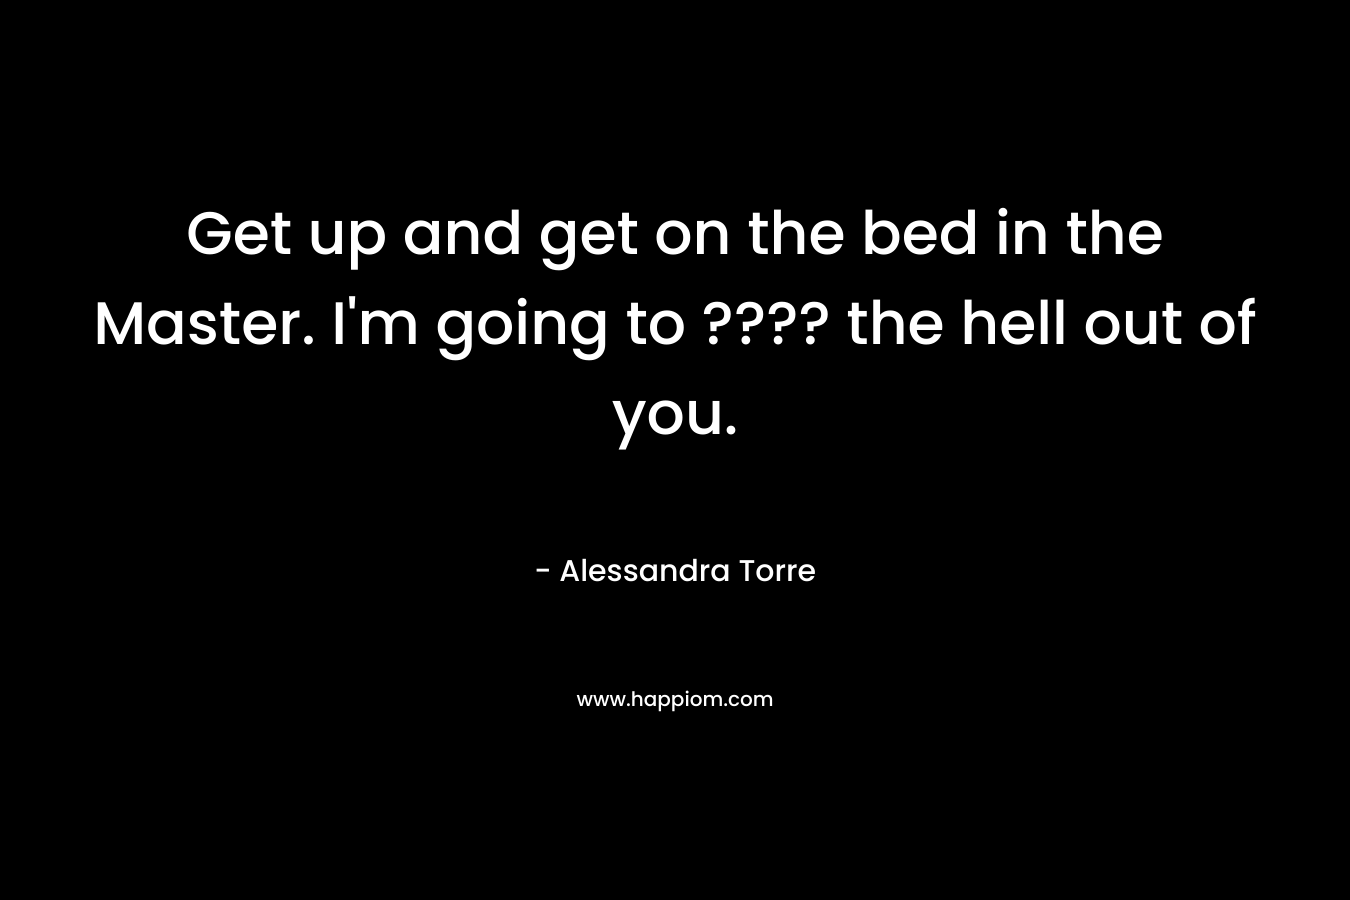 Get up and get on the bed in the Master. I’m going to ???? the hell out of you. – Alessandra Torre